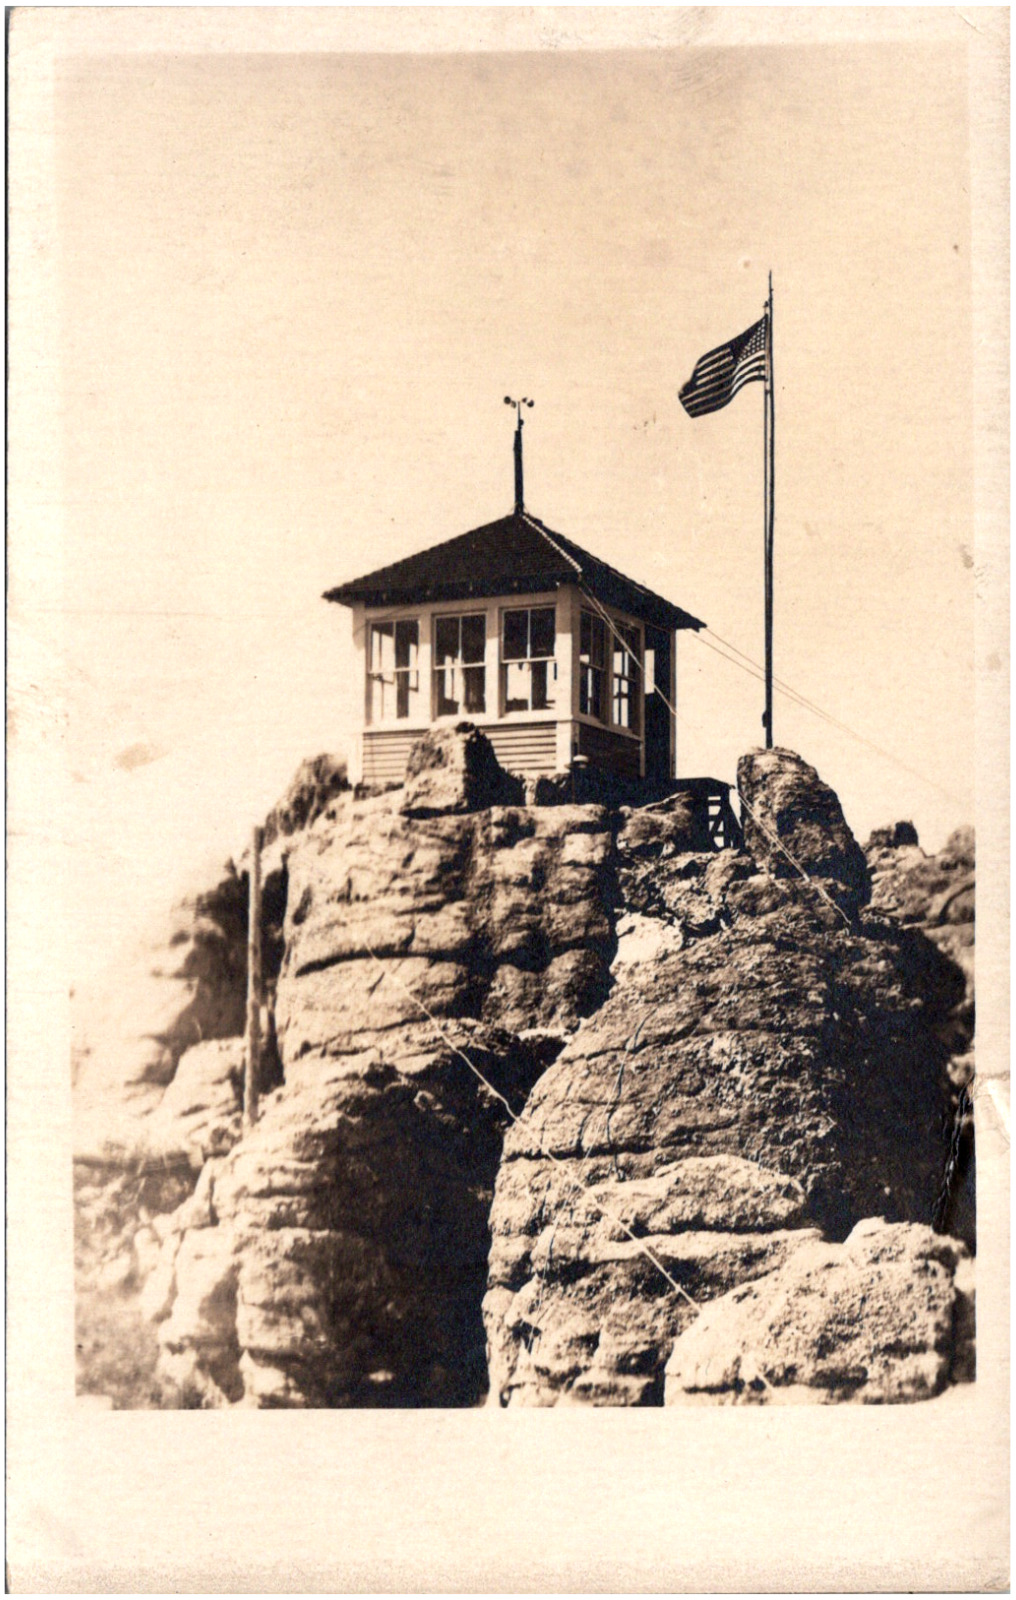 Harney Peak Lookout Tower in National Forest South Dakota 1920s RPPC Postcard